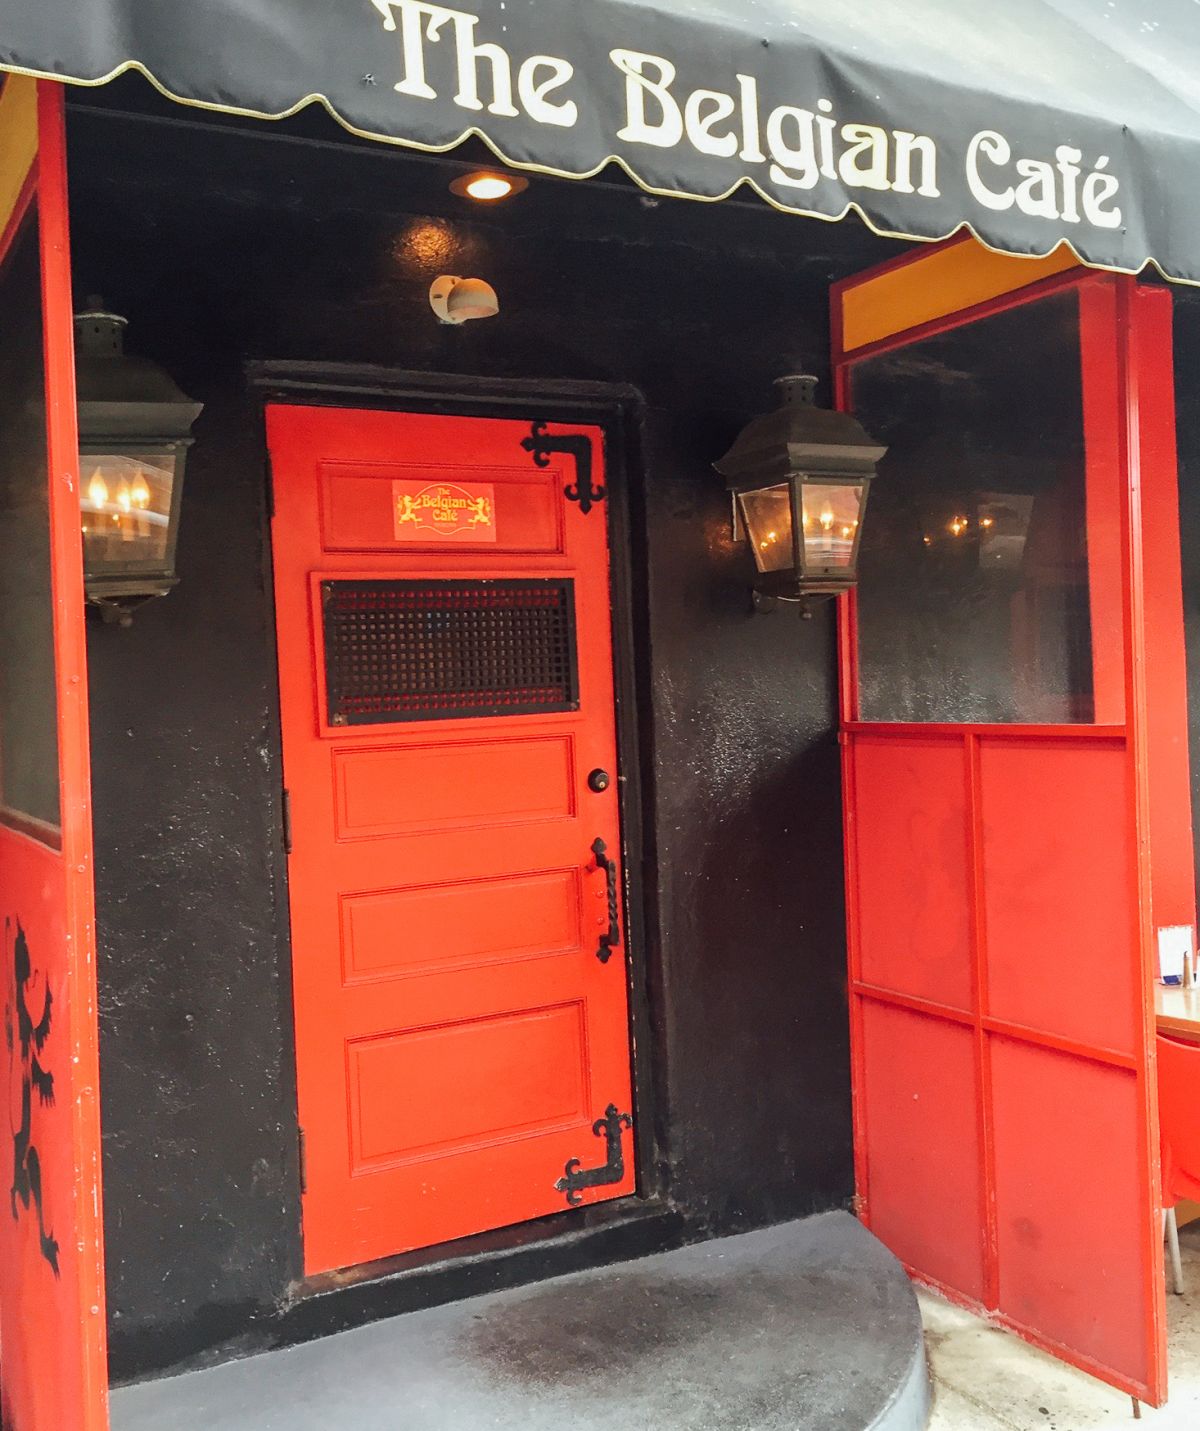 The Belgian Cafe